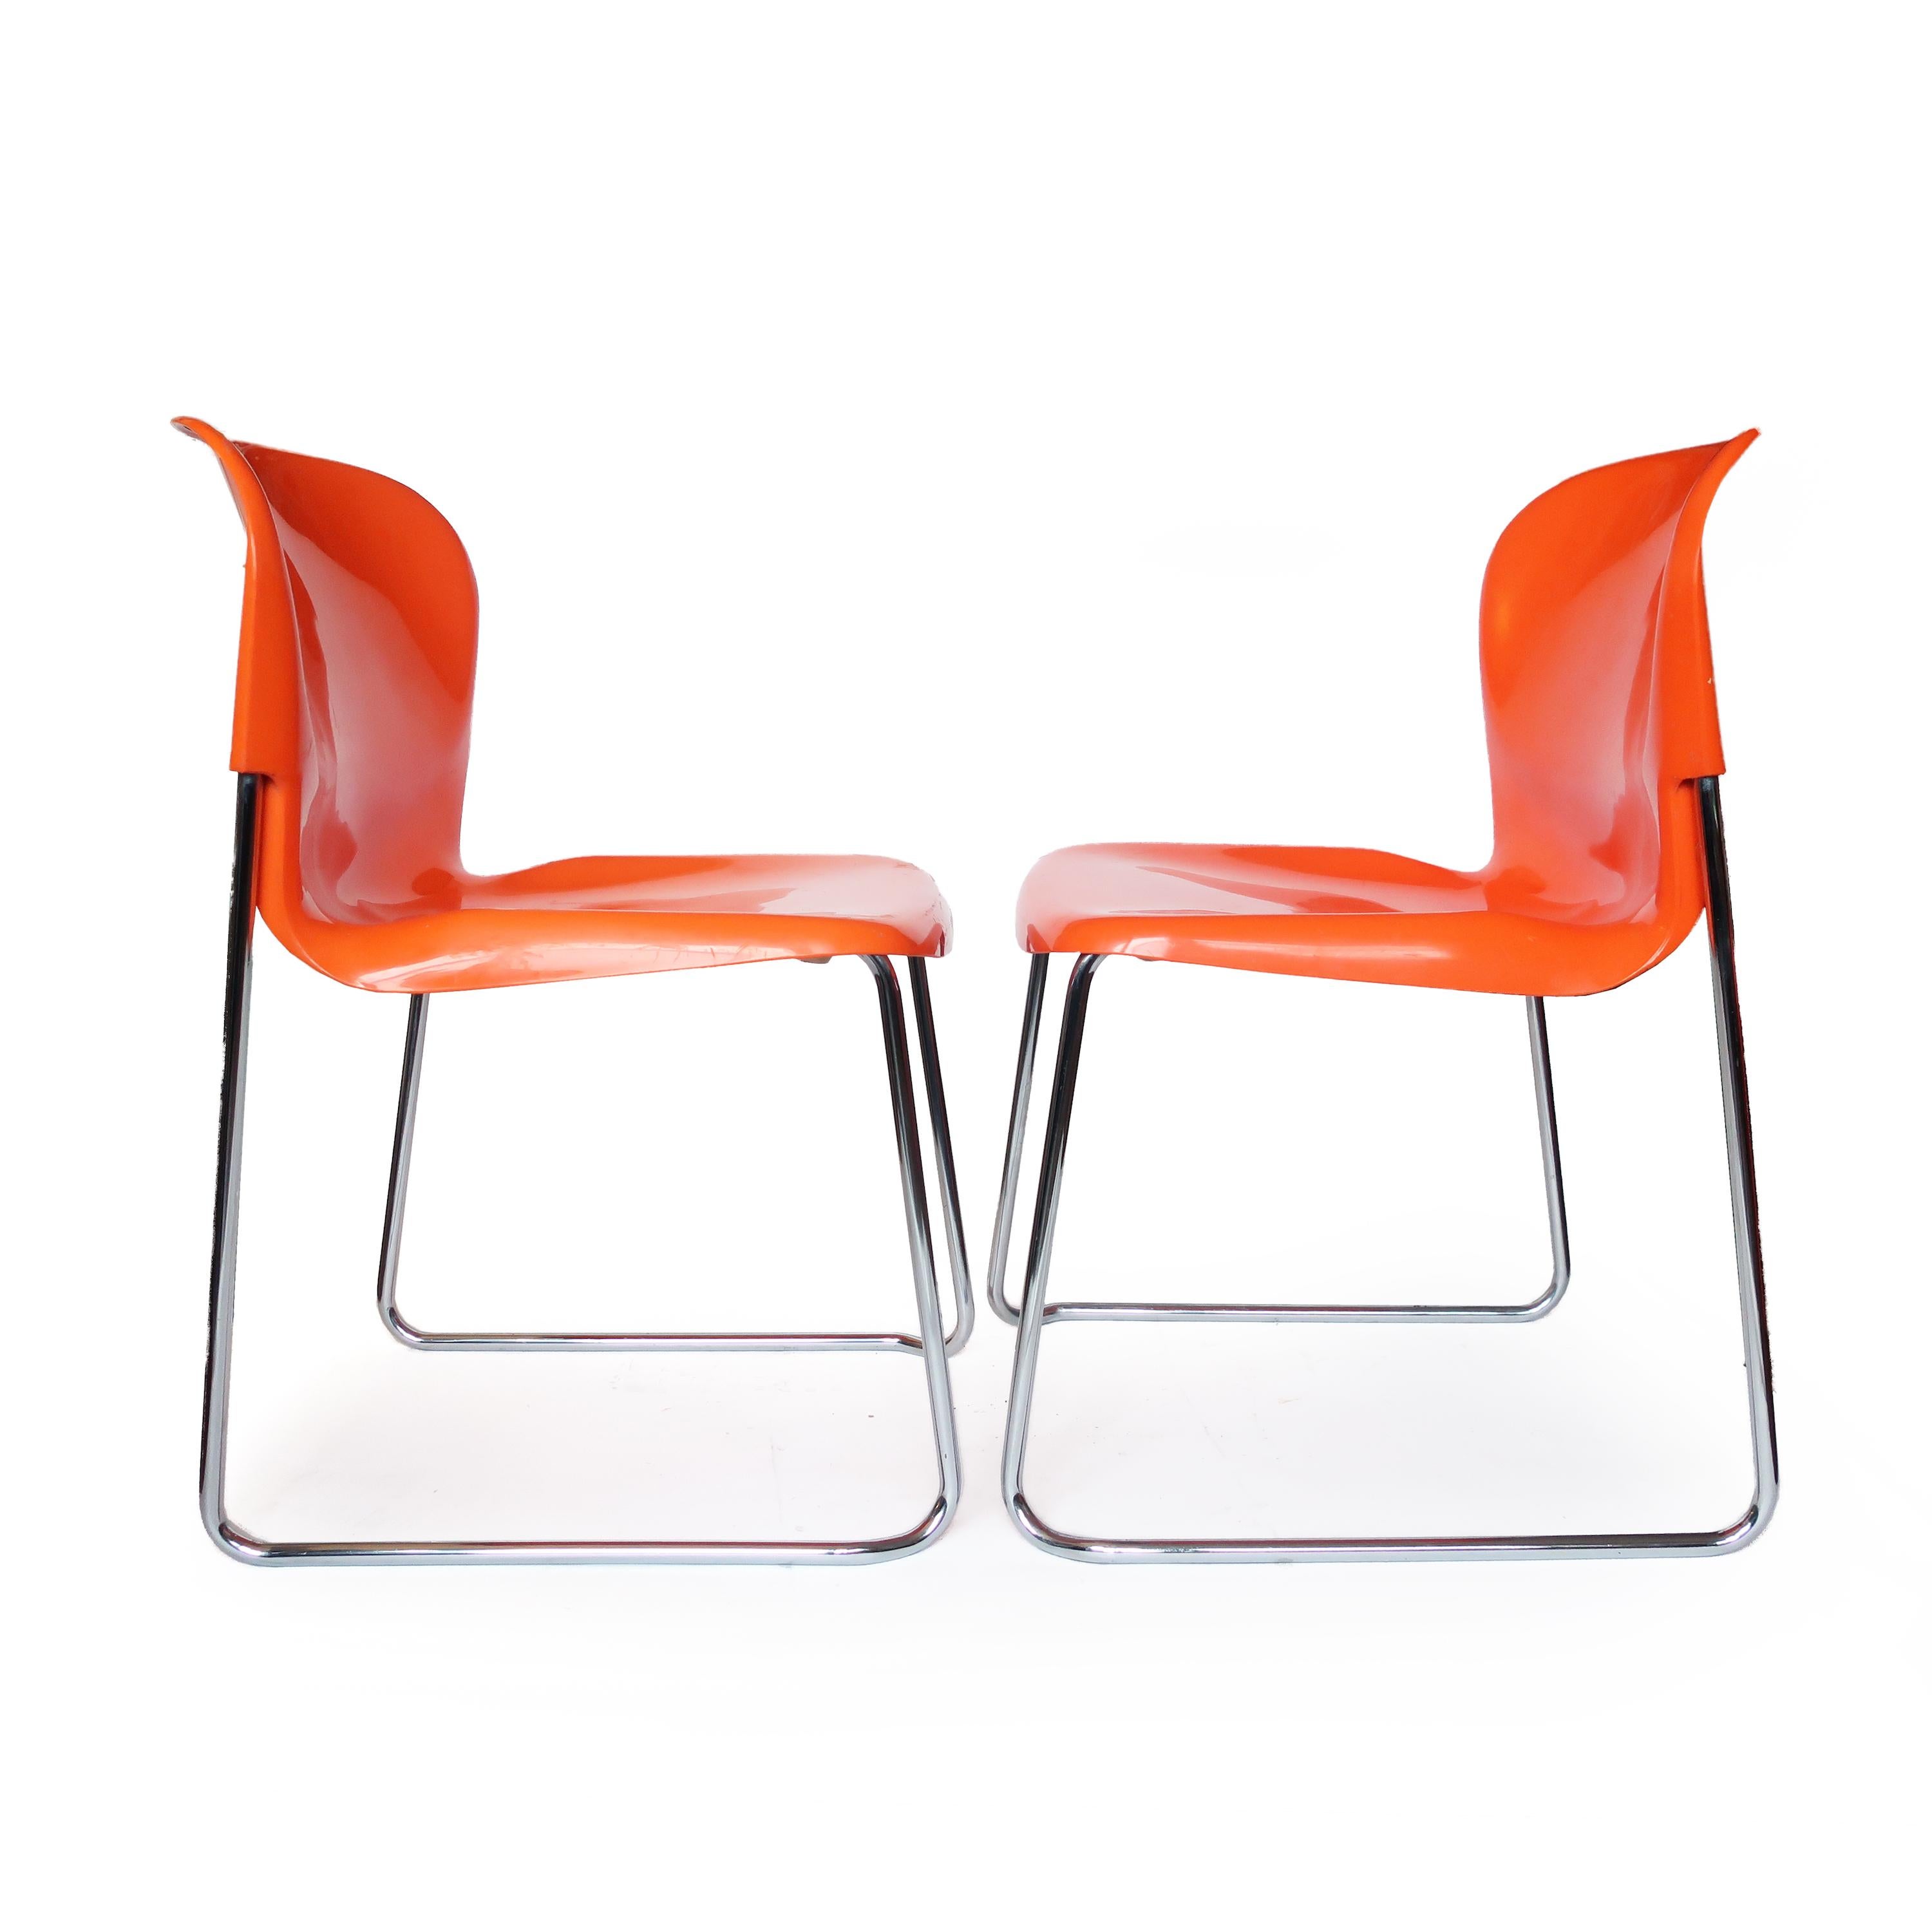 A brightly colored pair of SM 400 Swing chairs designed in the 1970s by Gerd Lange for Drabert, a West German furniture maker. Orange molded plastic seats sit on a chrome frame that allows for easy stacking for storage. In good vintage condition